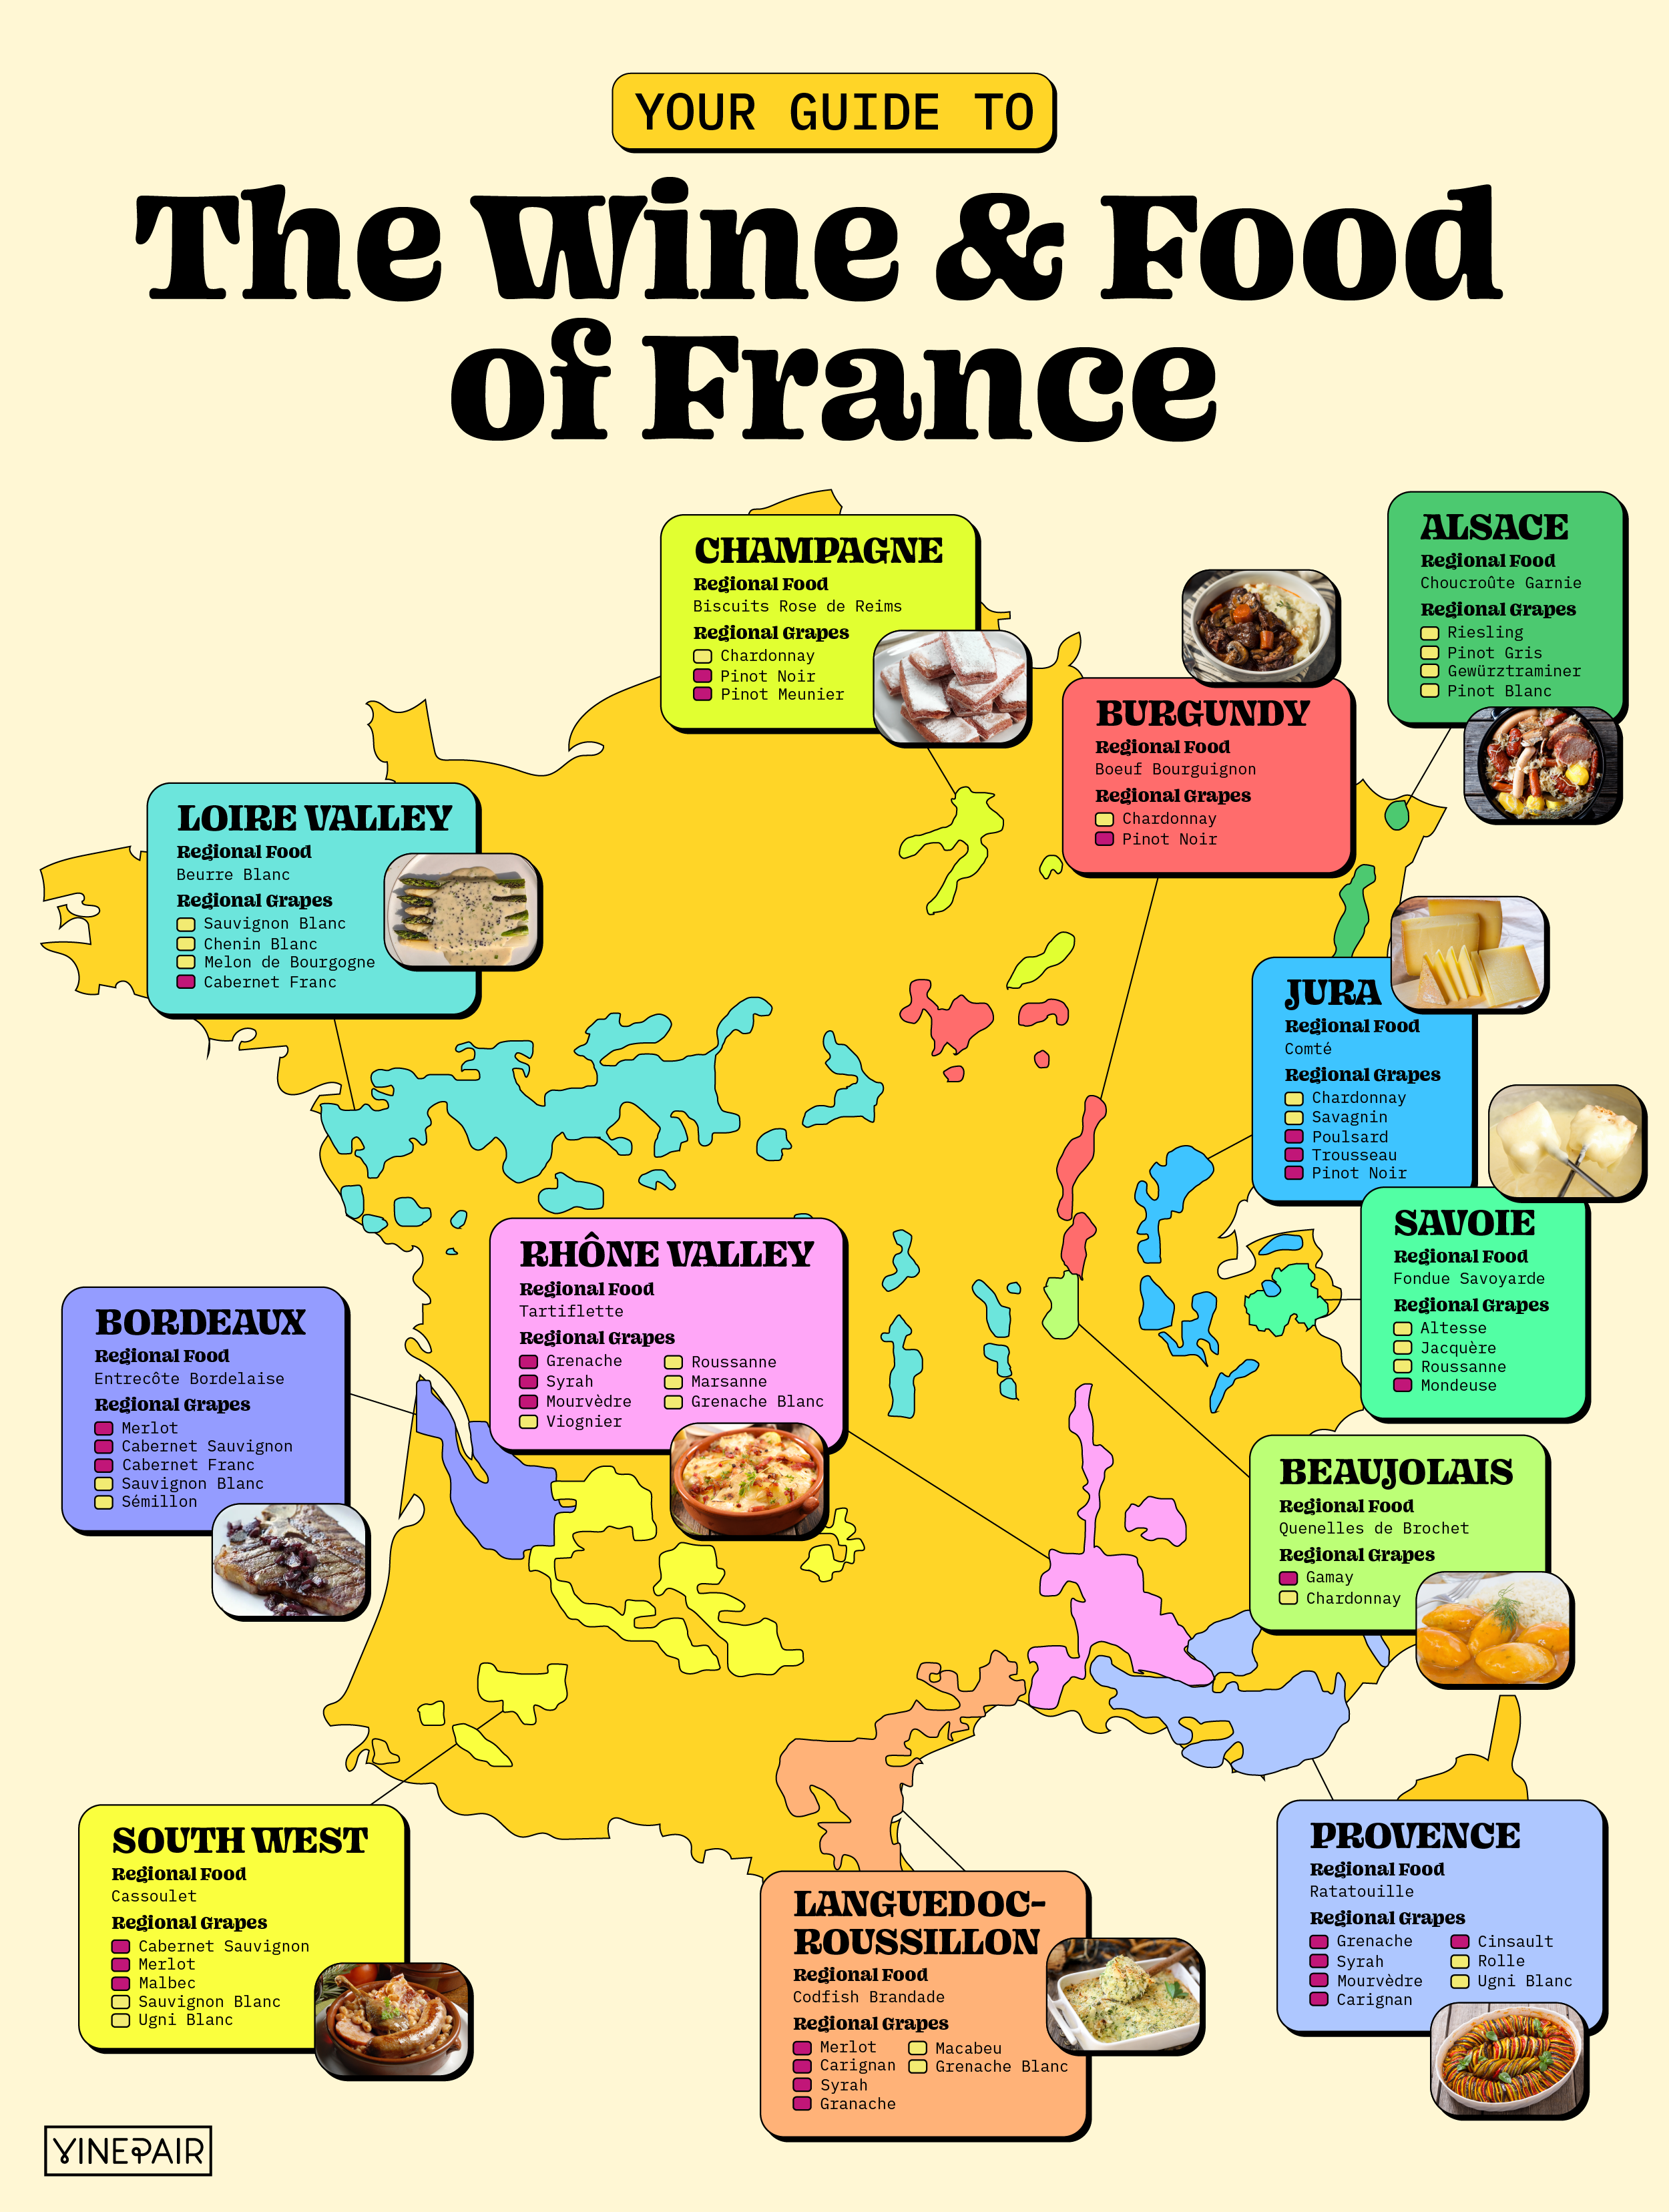 Your Guide To The Wine And Food of France [Visualization] 